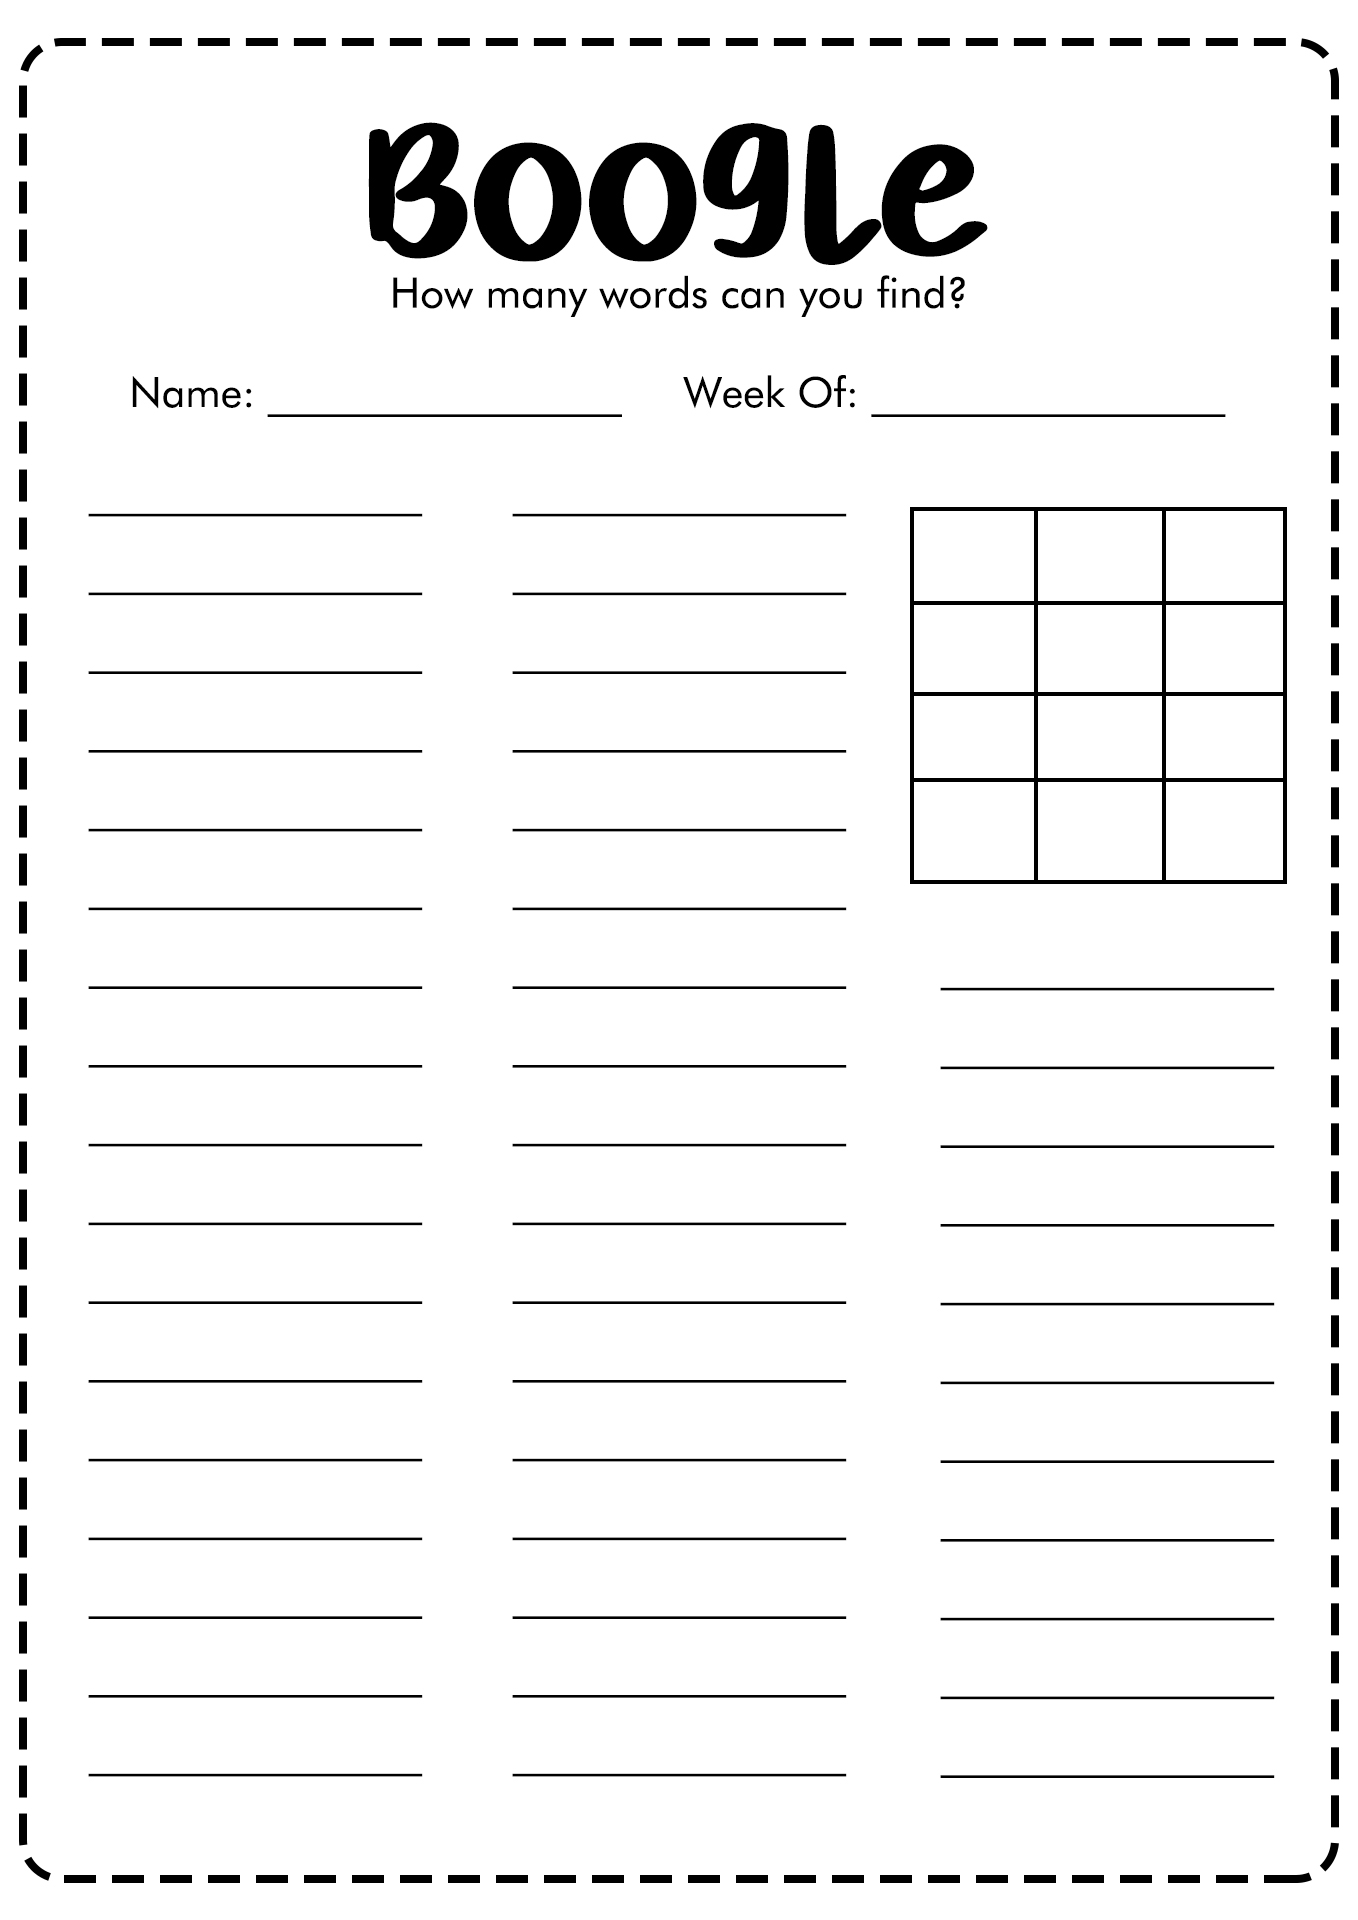 pancake-day-free-printables-word-puzzles-for-kids-words-activity-sheets